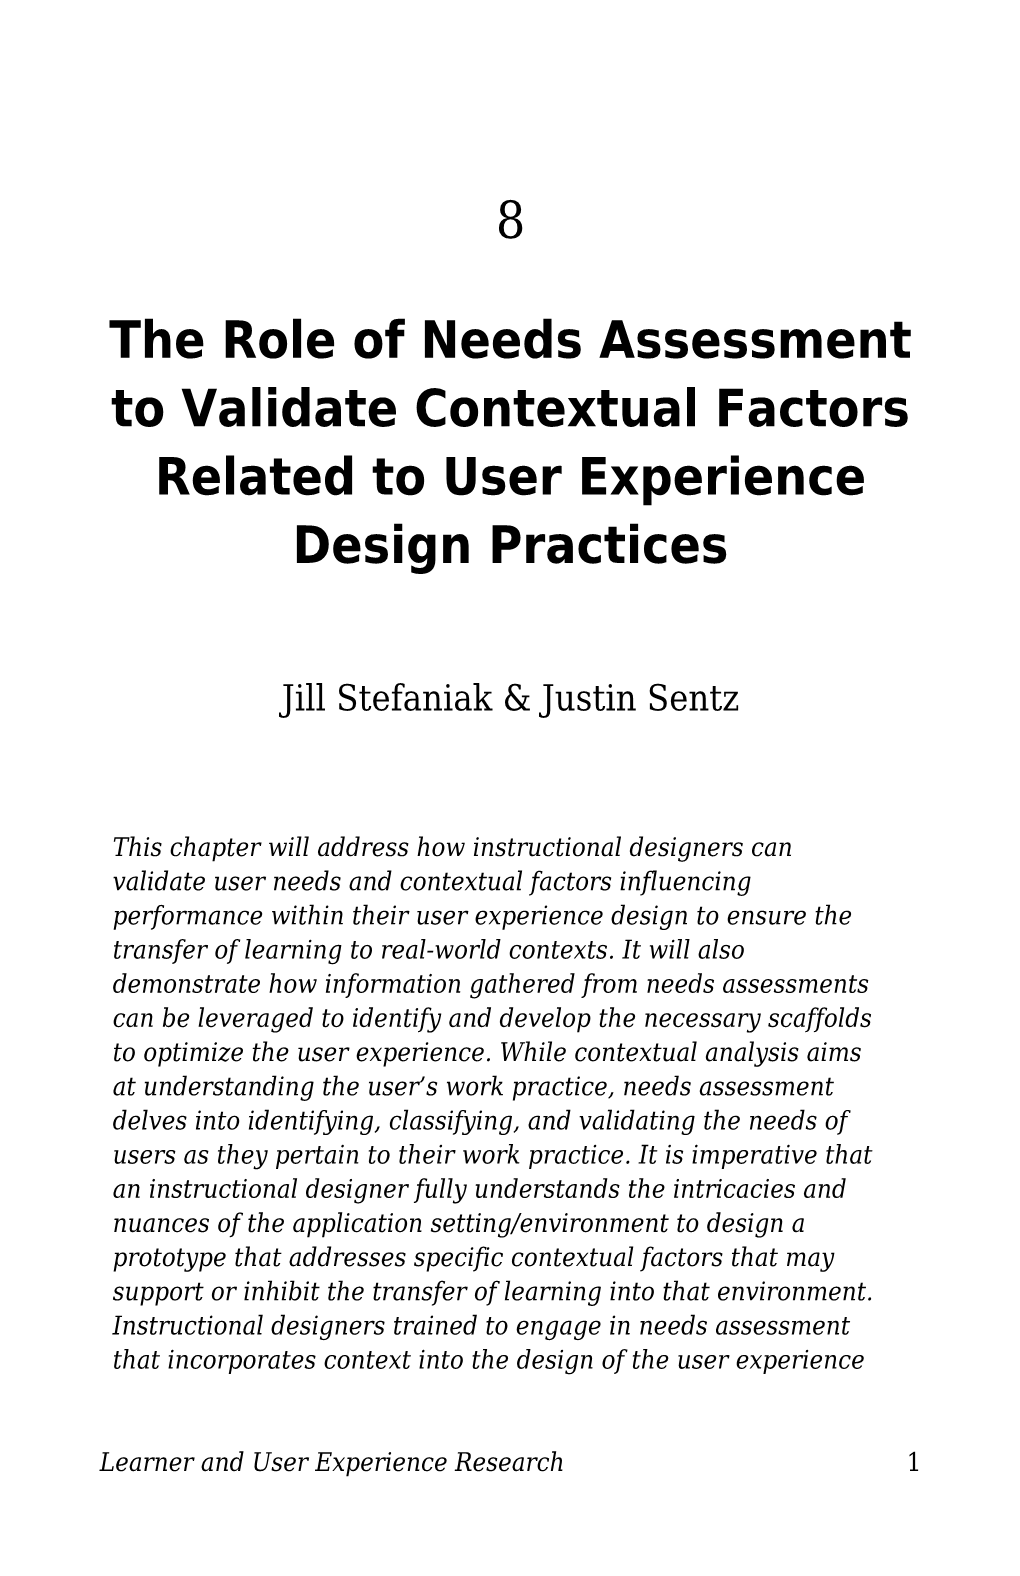 The Role of Needs Assessment to Validate Contextual Factors Related to User Experience Design Practices